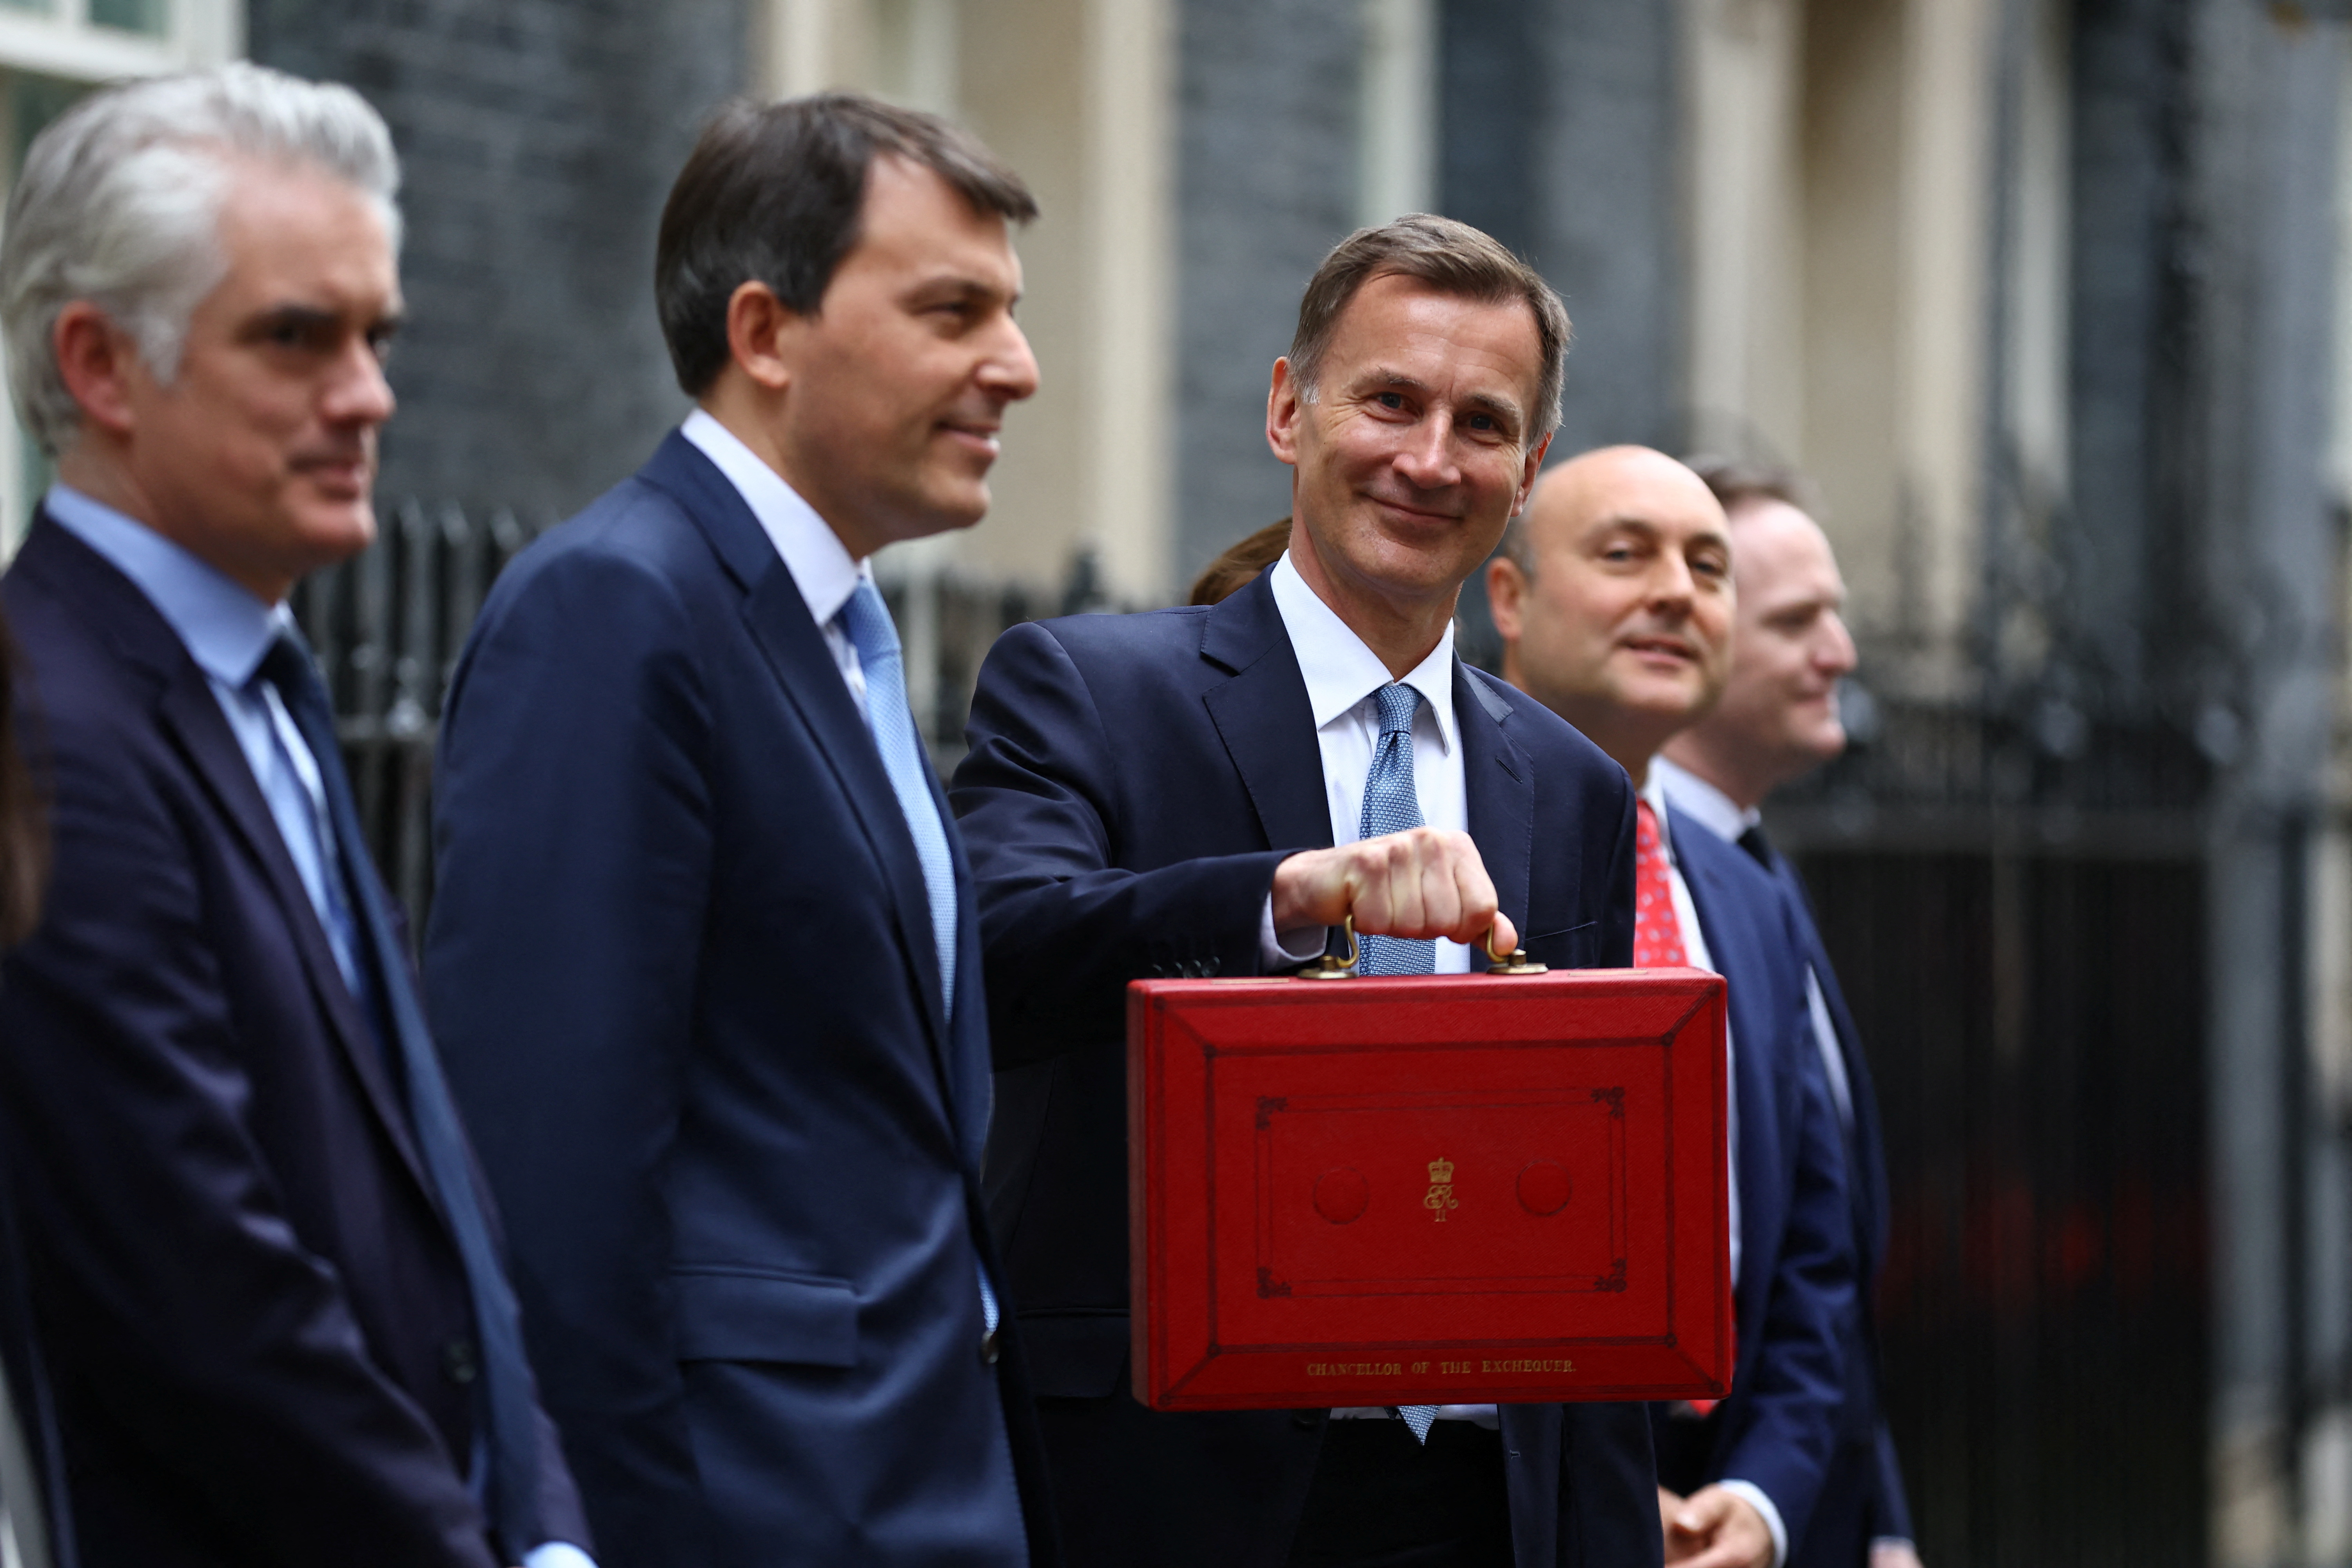 Chancellor of the Exchequer Hunt holds the budget box outside Downing Street in London